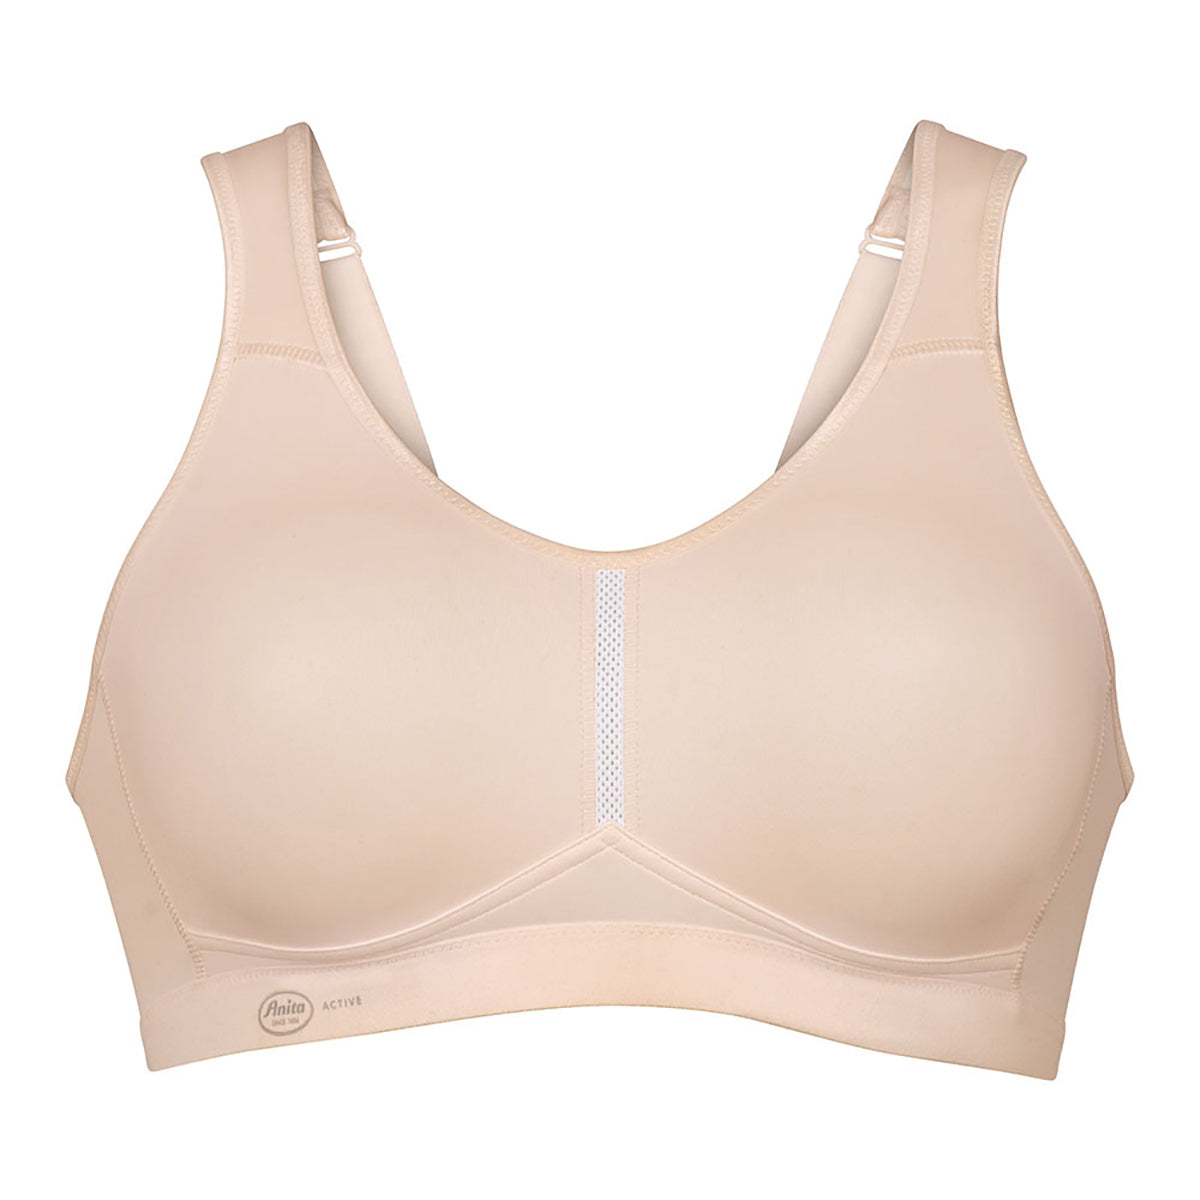 Intimo Lingerie - The most supportive sports bra you'll ever own. The Active  Contour Bra is now available in a fresh summer white. Shop the new Active  Collection online now:  Get